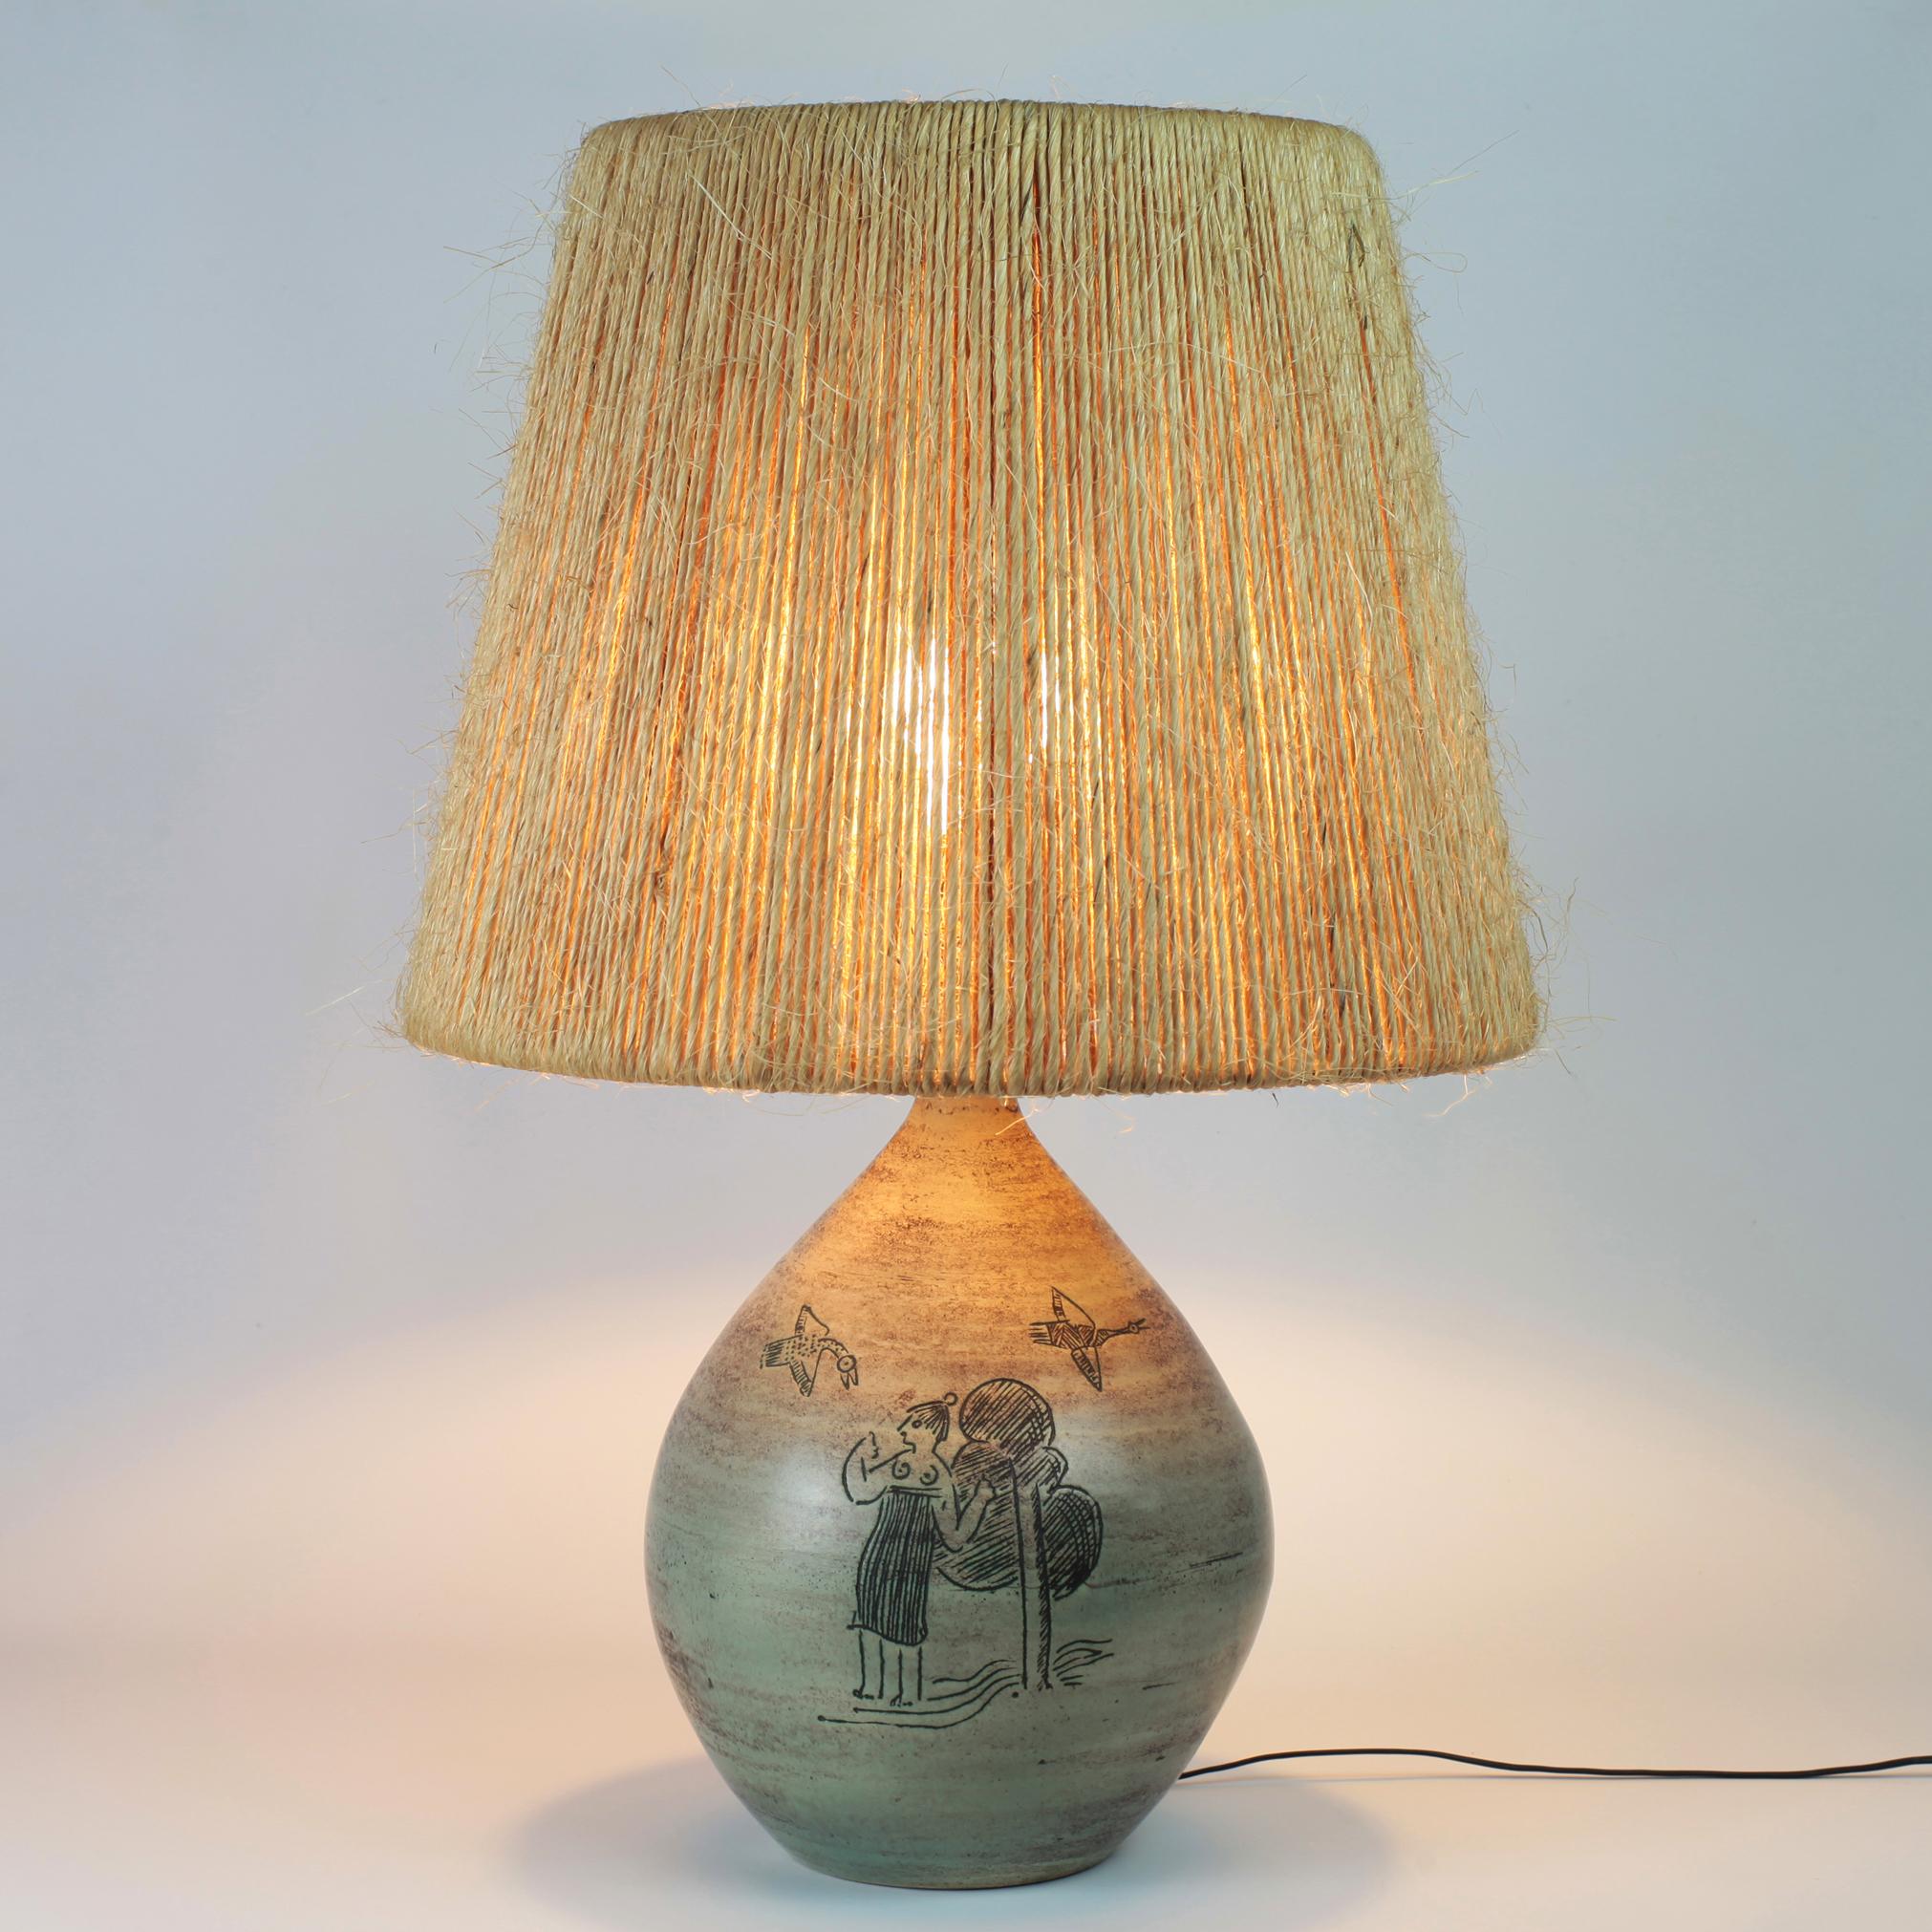 Ceramic table lamp by Jacques Blin with sgraffito decoration.
New original rope shade
Signed.
Measures: Total height with shade 63 cm. Height of the ceramic only 37 cm.
B22 socket.